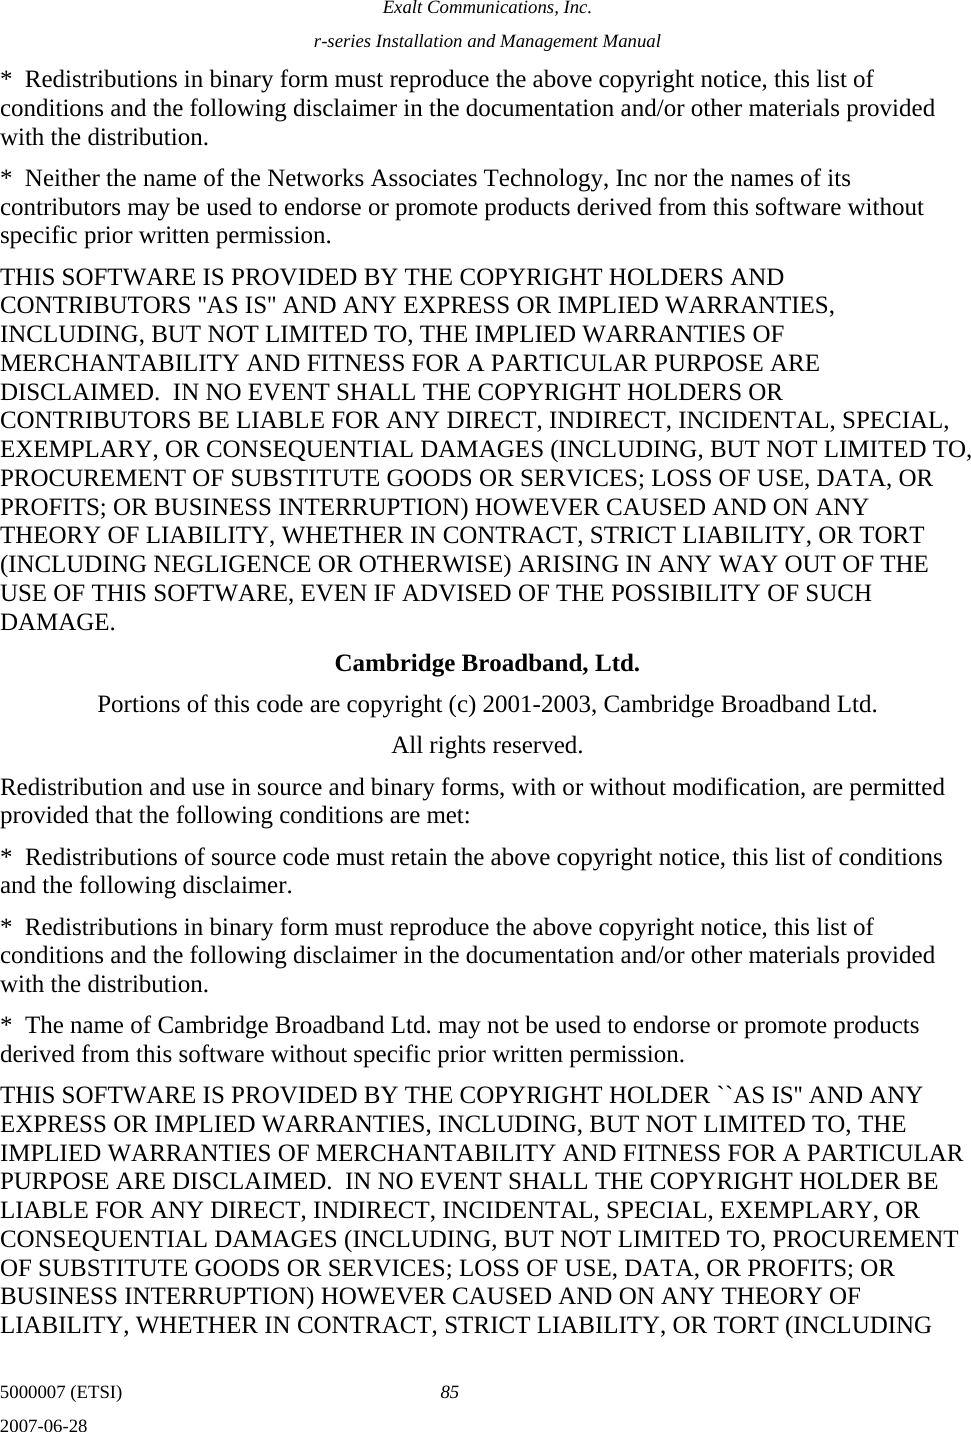 Exalt Communications, Inc. r-series Installation and Management Manual 5000007 (ETSI)  85 2007-06-28  *  Redistributions in binary form must reproduce the above copyright notice, this list of conditions and the following disclaimer in the documentation and/or other materials provided with the distribution. *  Neither the name of the Networks Associates Technology, Inc nor the names of its contributors may be used to endorse or promote products derived from this software without specific prior written permission. THIS SOFTWARE IS PROVIDED BY THE COPYRIGHT HOLDERS AND CONTRIBUTORS &apos;&apos;AS IS&apos;&apos; AND ANY EXPRESS OR IMPLIED WARRANTIES, INCLUDING, BUT NOT LIMITED TO, THE IMPLIED WARRANTIES OF MERCHANTABILITY AND FITNESS FOR A PARTICULAR PURPOSE ARE DISCLAIMED.  IN NO EVENT SHALL THE COPYRIGHT HOLDERS OR CONTRIBUTORS BE LIABLE FOR ANY DIRECT, INDIRECT, INCIDENTAL, SPECIAL, EXEMPLARY, OR CONSEQUENTIAL DAMAGES (INCLUDING, BUT NOT LIMITED TO, PROCUREMENT OF SUBSTITUTE GOODS OR SERVICES; LOSS OF USE, DATA, OR PROFITS; OR BUSINESS INTERRUPTION) HOWEVER CAUSED AND ON ANY THEORY OF LIABILITY, WHETHER IN CONTRACT, STRICT LIABILITY, OR TORT (INCLUDING NEGLIGENCE OR OTHERWISE) ARISING IN ANY WAY OUT OF THE USE OF THIS SOFTWARE, EVEN IF ADVISED OF THE POSSIBILITY OF SUCH DAMAGE. Cambridge Broadband, Ltd. Portions of this code are copyright (c) 2001-2003, Cambridge Broadband Ltd. All rights reserved. Redistribution and use in source and binary forms, with or without modification, are permitted provided that the following conditions are met: *  Redistributions of source code must retain the above copyright notice, this list of conditions and the following disclaimer. *  Redistributions in binary form must reproduce the above copyright notice, this list of conditions and the following disclaimer in the documentation and/or other materials provided with the distribution. *  The name of Cambridge Broadband Ltd. may not be used to endorse or promote products derived from this software without specific prior written permission. THIS SOFTWARE IS PROVIDED BY THE COPYRIGHT HOLDER ``AS IS&apos;&apos; AND ANY EXPRESS OR IMPLIED WARRANTIES, INCLUDING, BUT NOT LIMITED TO, THE IMPLIED WARRANTIES OF MERCHANTABILITY AND FITNESS FOR A PARTICULAR PURPOSE ARE DISCLAIMED.  IN NO EVENT SHALL THE COPYRIGHT HOLDER BE LIABLE FOR ANY DIRECT, INDIRECT, INCIDENTAL, SPECIAL, EXEMPLARY, OR CONSEQUENTIAL DAMAGES (INCLUDING, BUT NOT LIMITED TO, PROCUREMENT OF SUBSTITUTE GOODS OR SERVICES; LOSS OF USE, DATA, OR PROFITS; OR BUSINESS INTERRUPTION) HOWEVER CAUSED AND ON ANY THEORY OF LIABILITY, WHETHER IN CONTRACT, STRICT LIABILITY, OR TORT (INCLUDING 